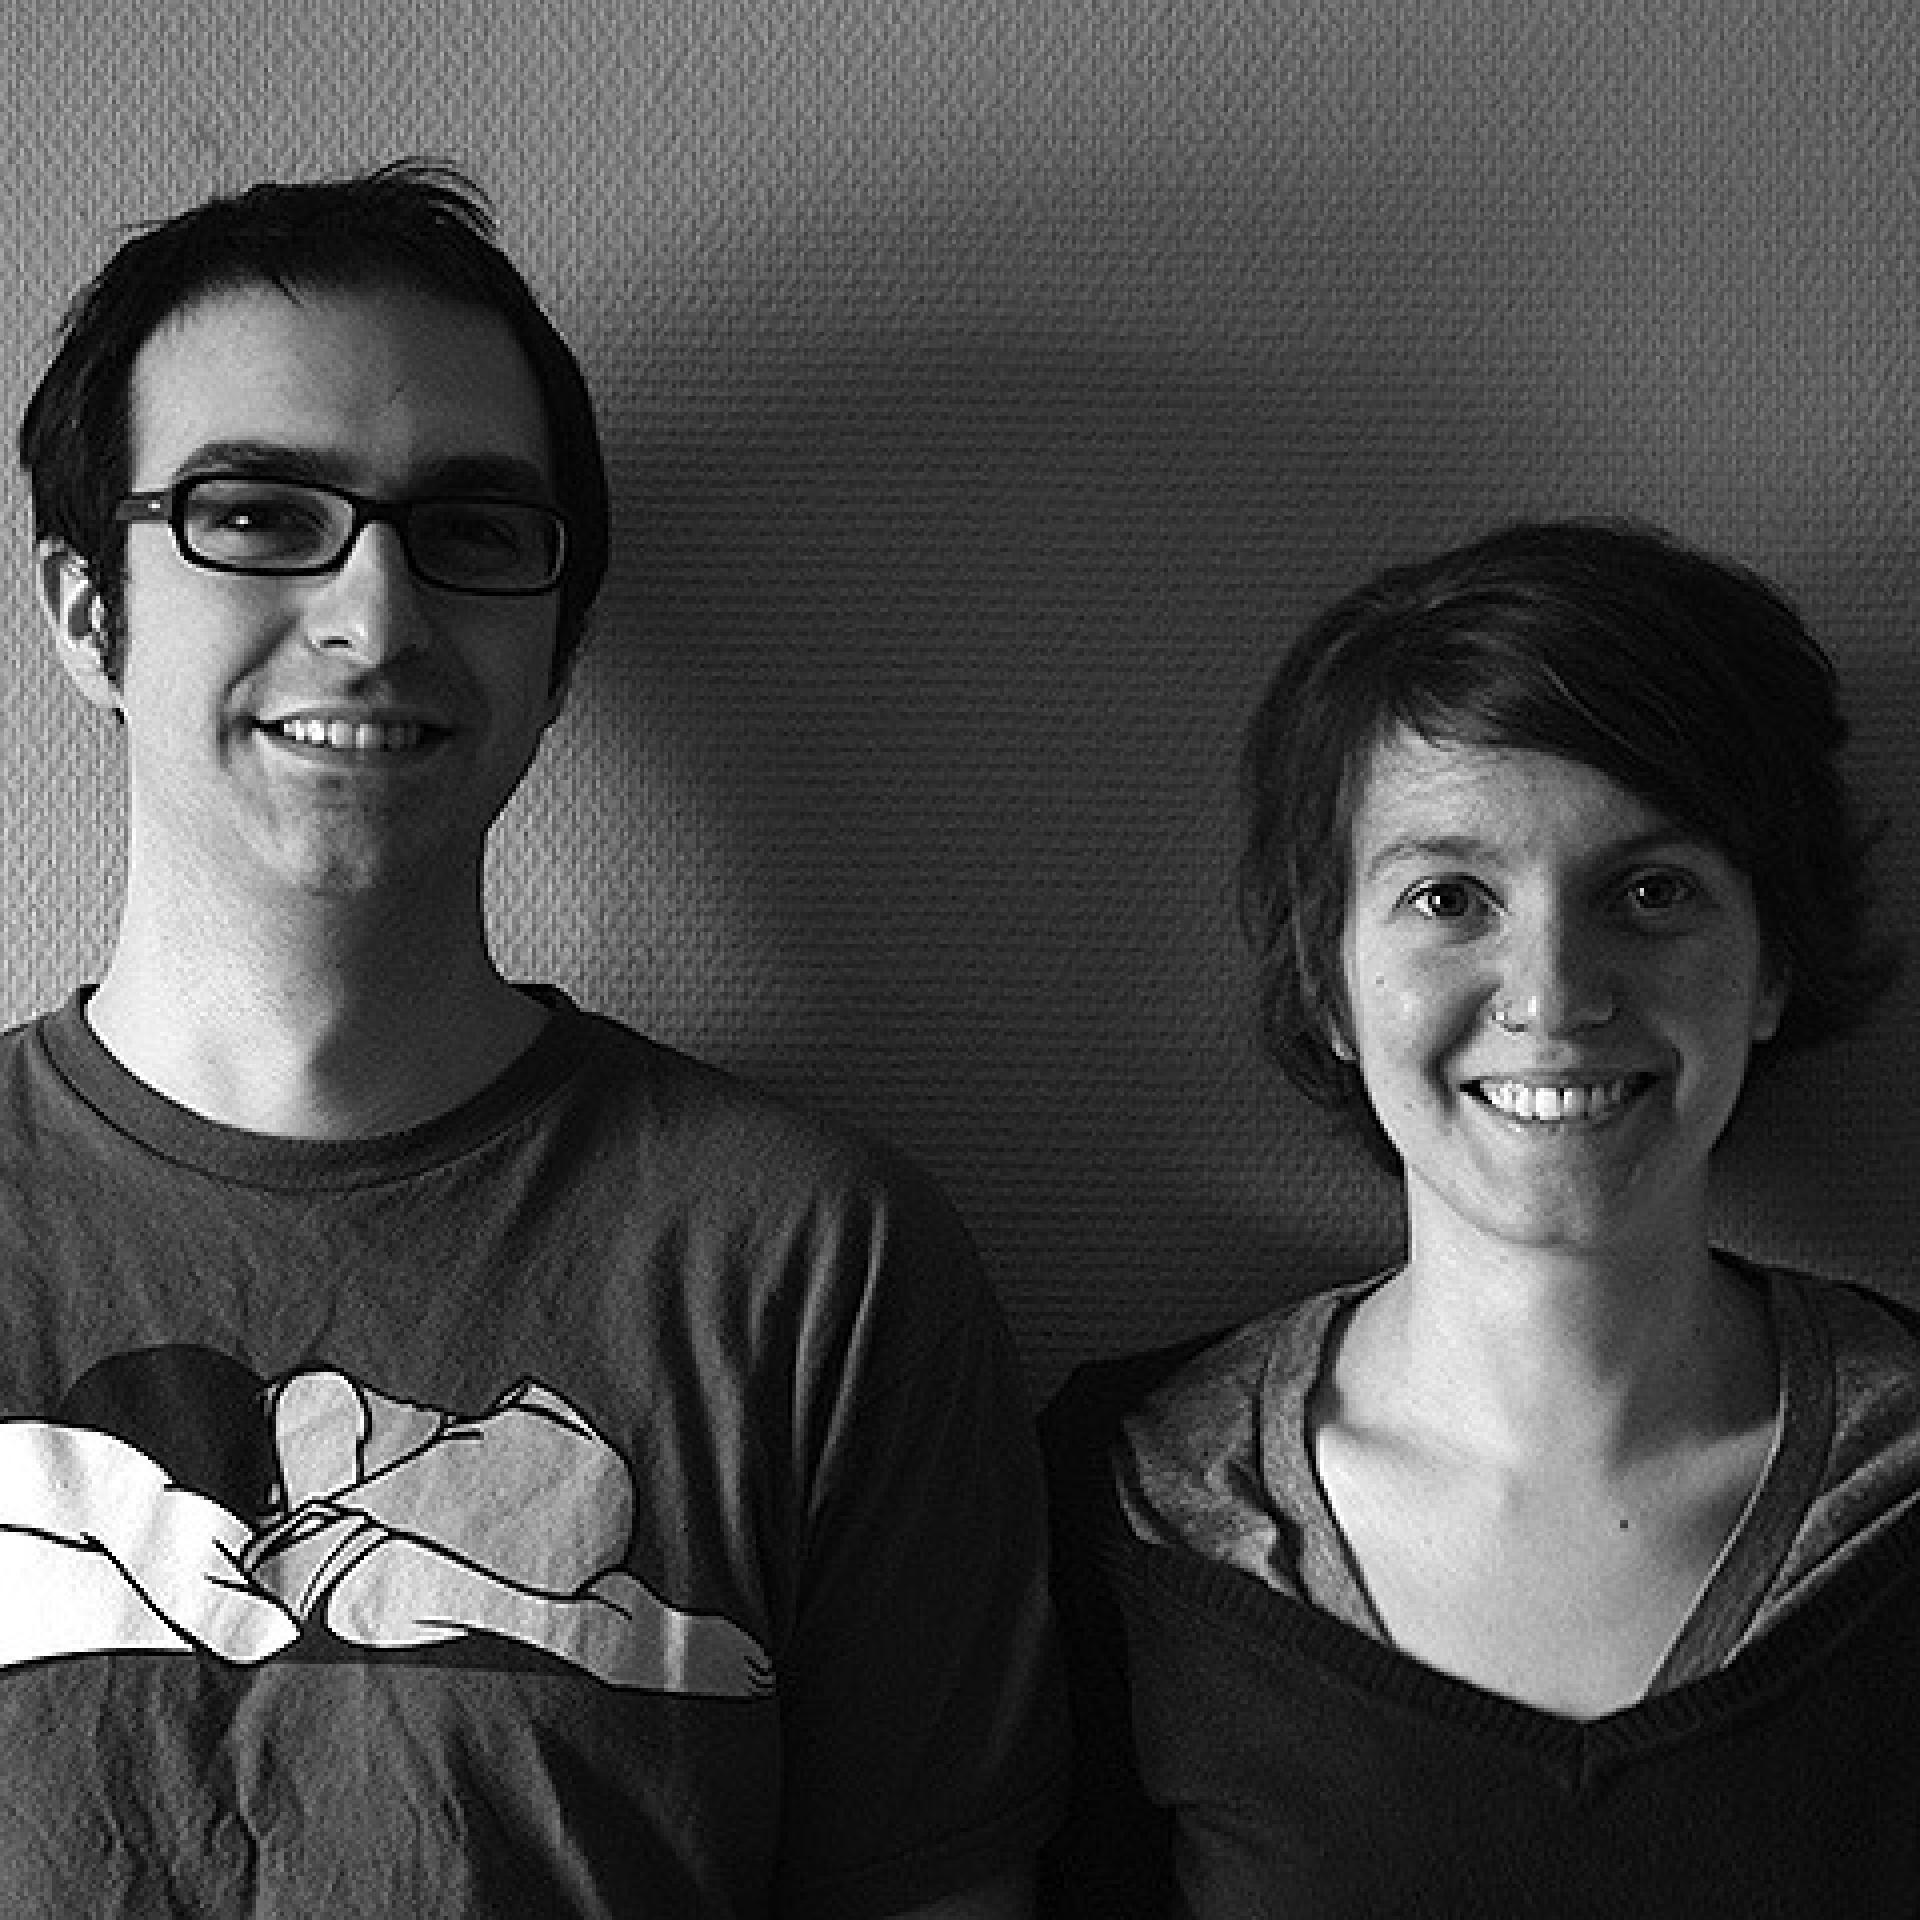 Mariabruna Fabrizi (*1982) and Fosco Lucarelli (*1981) are architects from Italy. They are currently based in Paris where they have founded the architectural practice Microcities and conduct independent architectural research through their website SOCKS. They write for several magazines about architecture and cities. They teach at the Éav&t, in Marne-La-Vallée, Paris and at EPFL, Lausanne. They were the content curator of “The Form of Form” exhibition in the 2016 Lisbon Triennial.